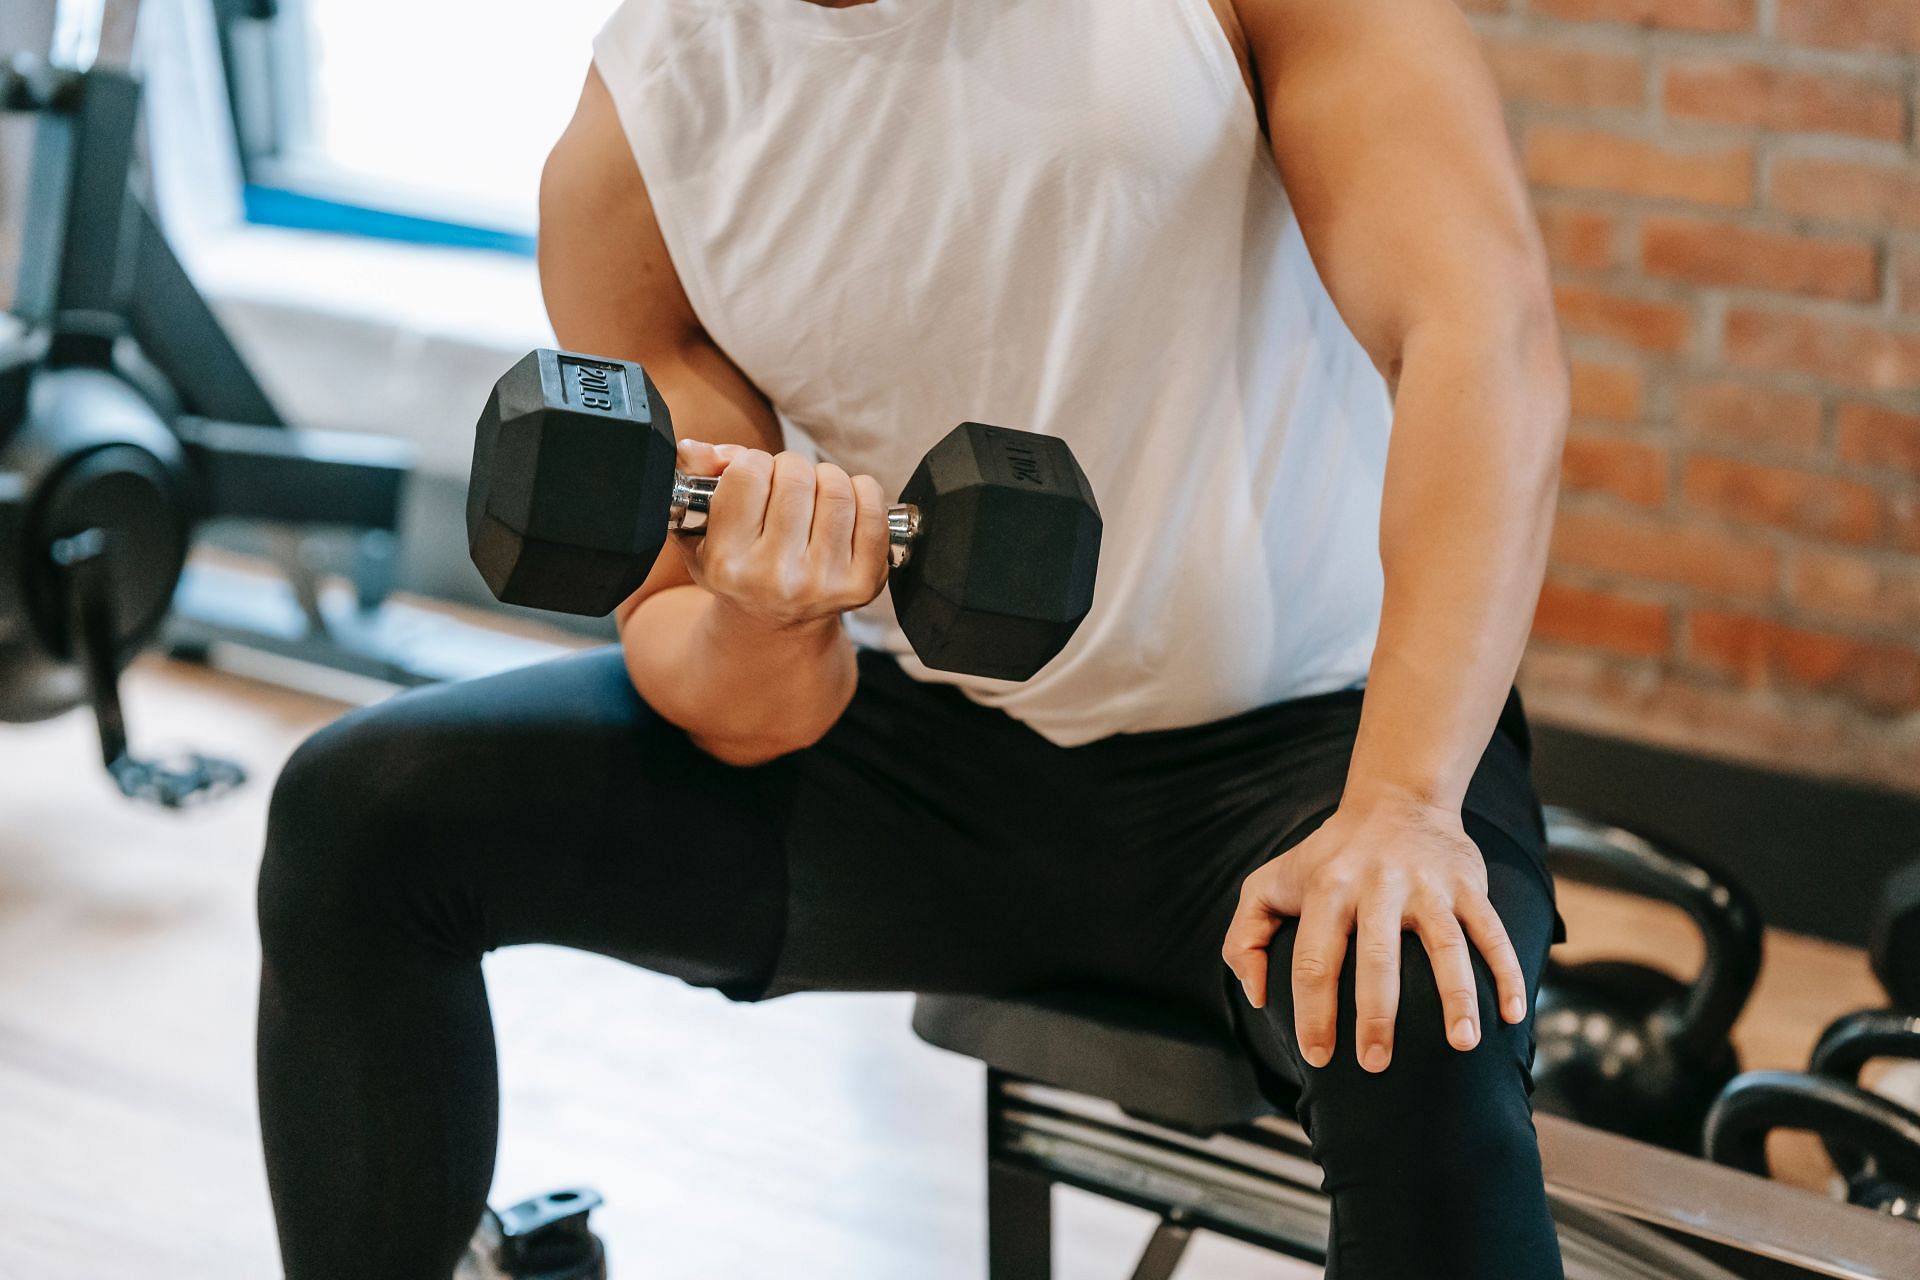 Dumbbells are the most important equipment in your home gym. (Image by Andres Ayrton / Pexels)